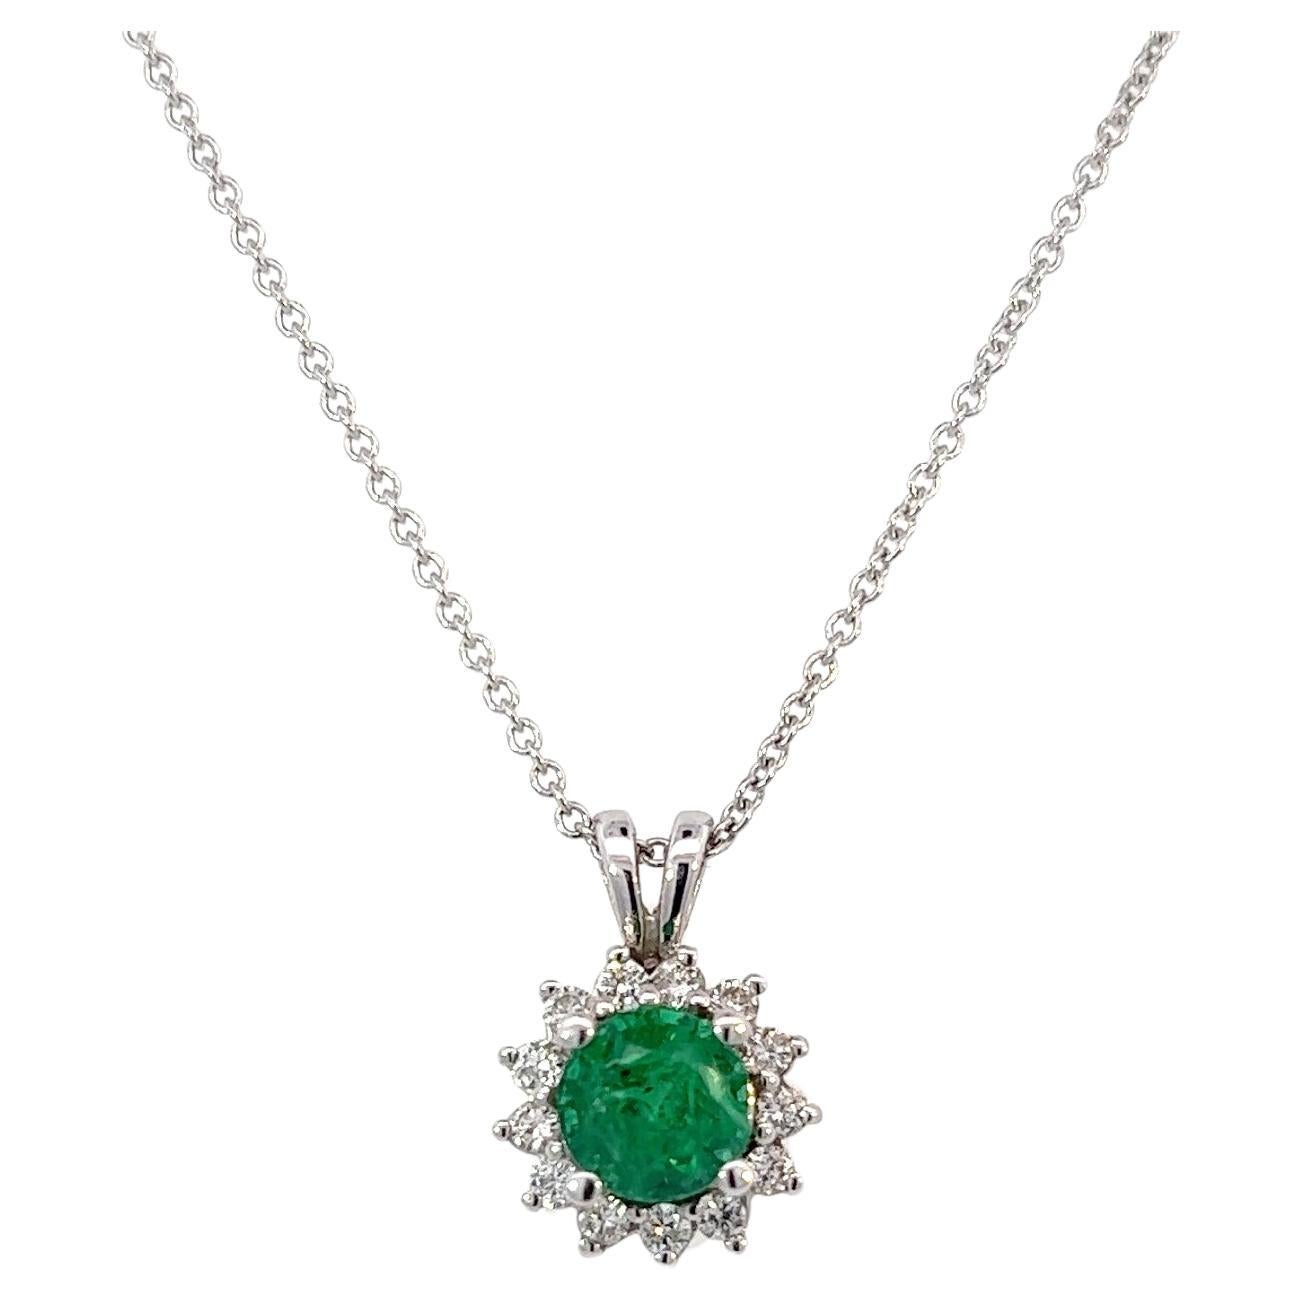 Natural Emerald Diamond Pendant With Chain 17.5" 14k WG 1.35 TCW Certified For Sale